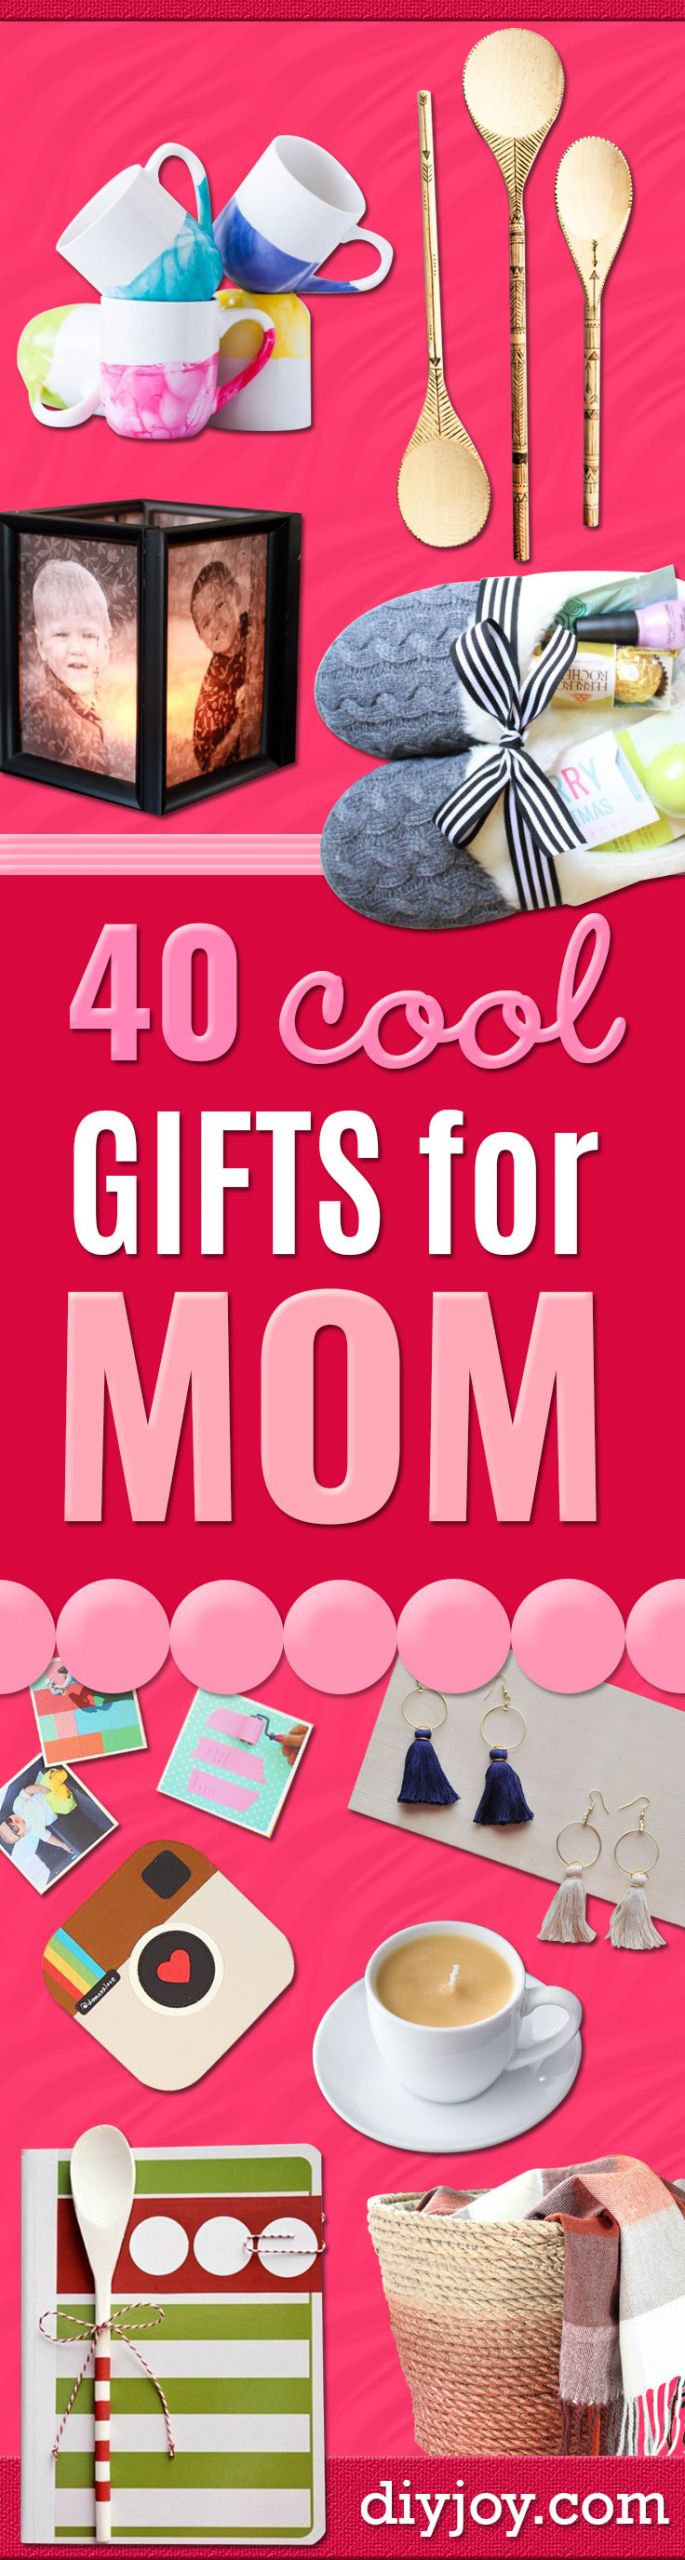 DIY Christmas Gift For Her
 40 Coolest Gifts To Make for Mom